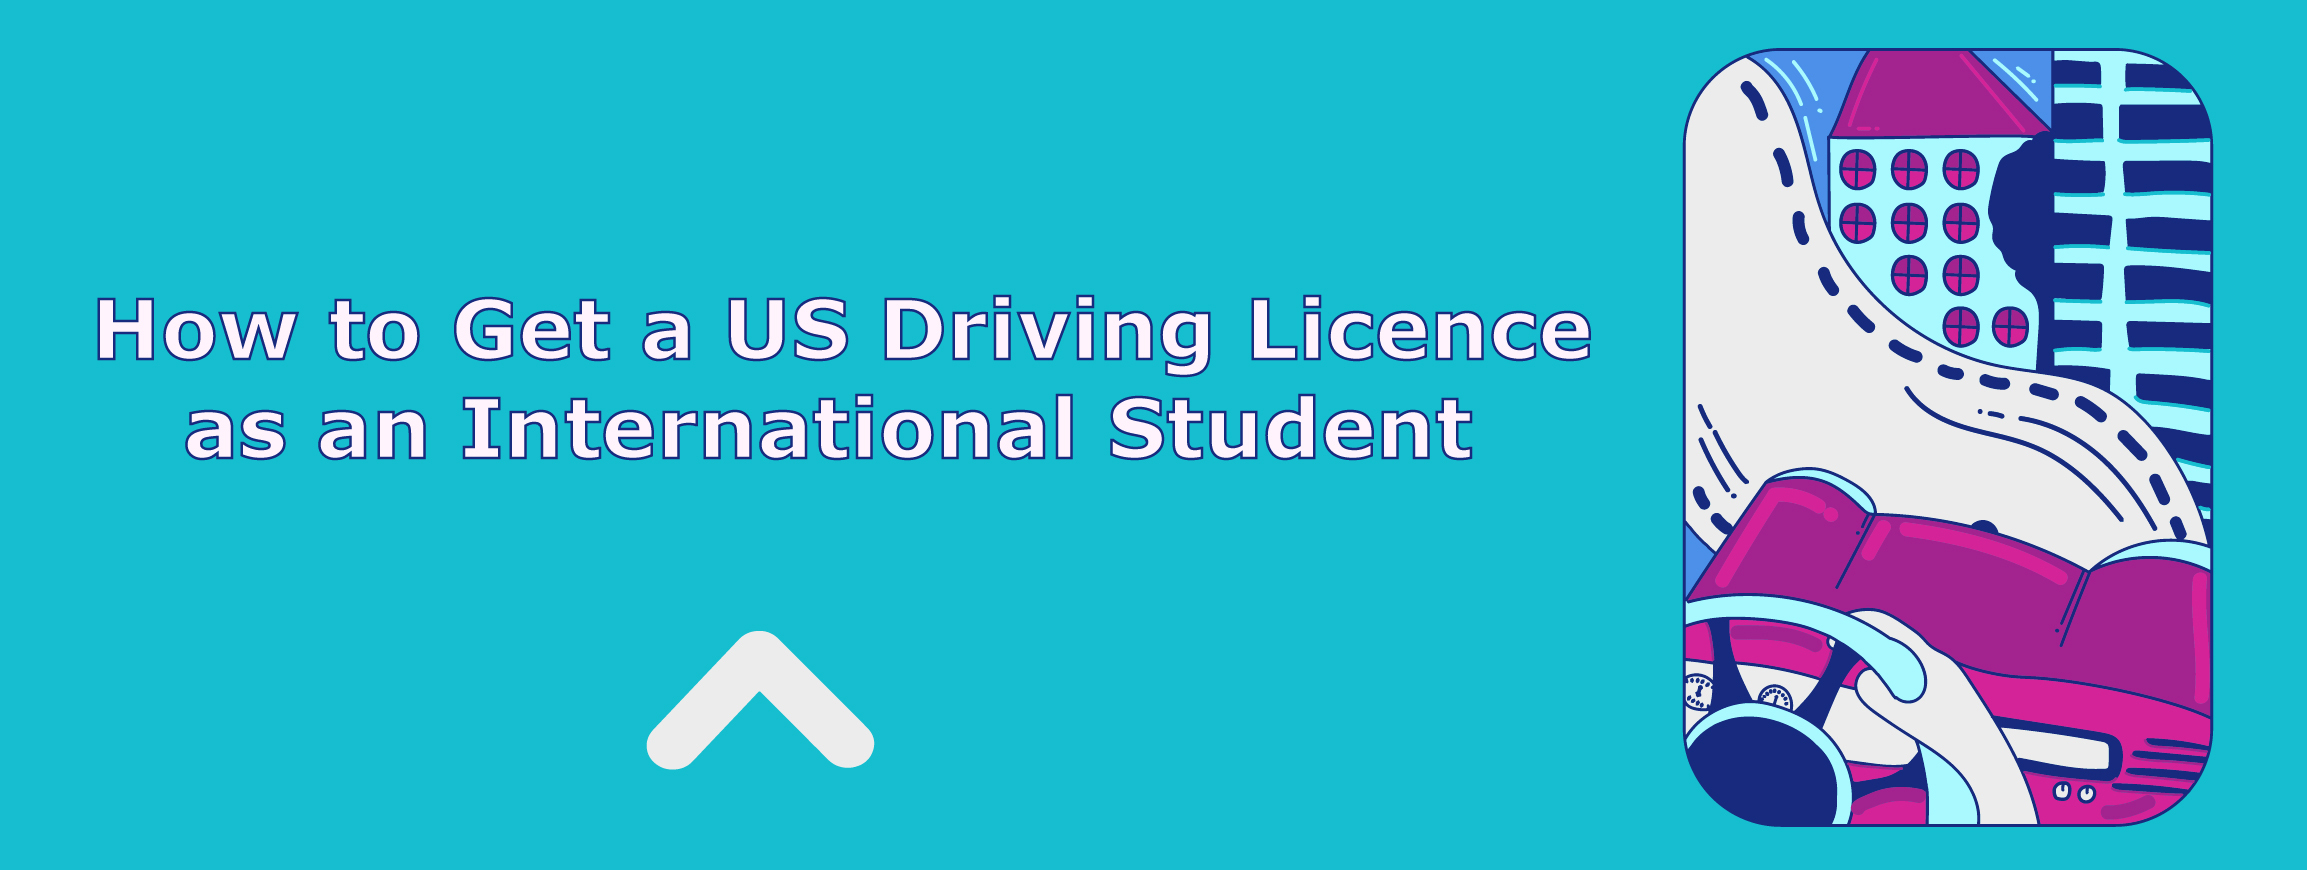 How to Get a U.S. Driving License as an International Student